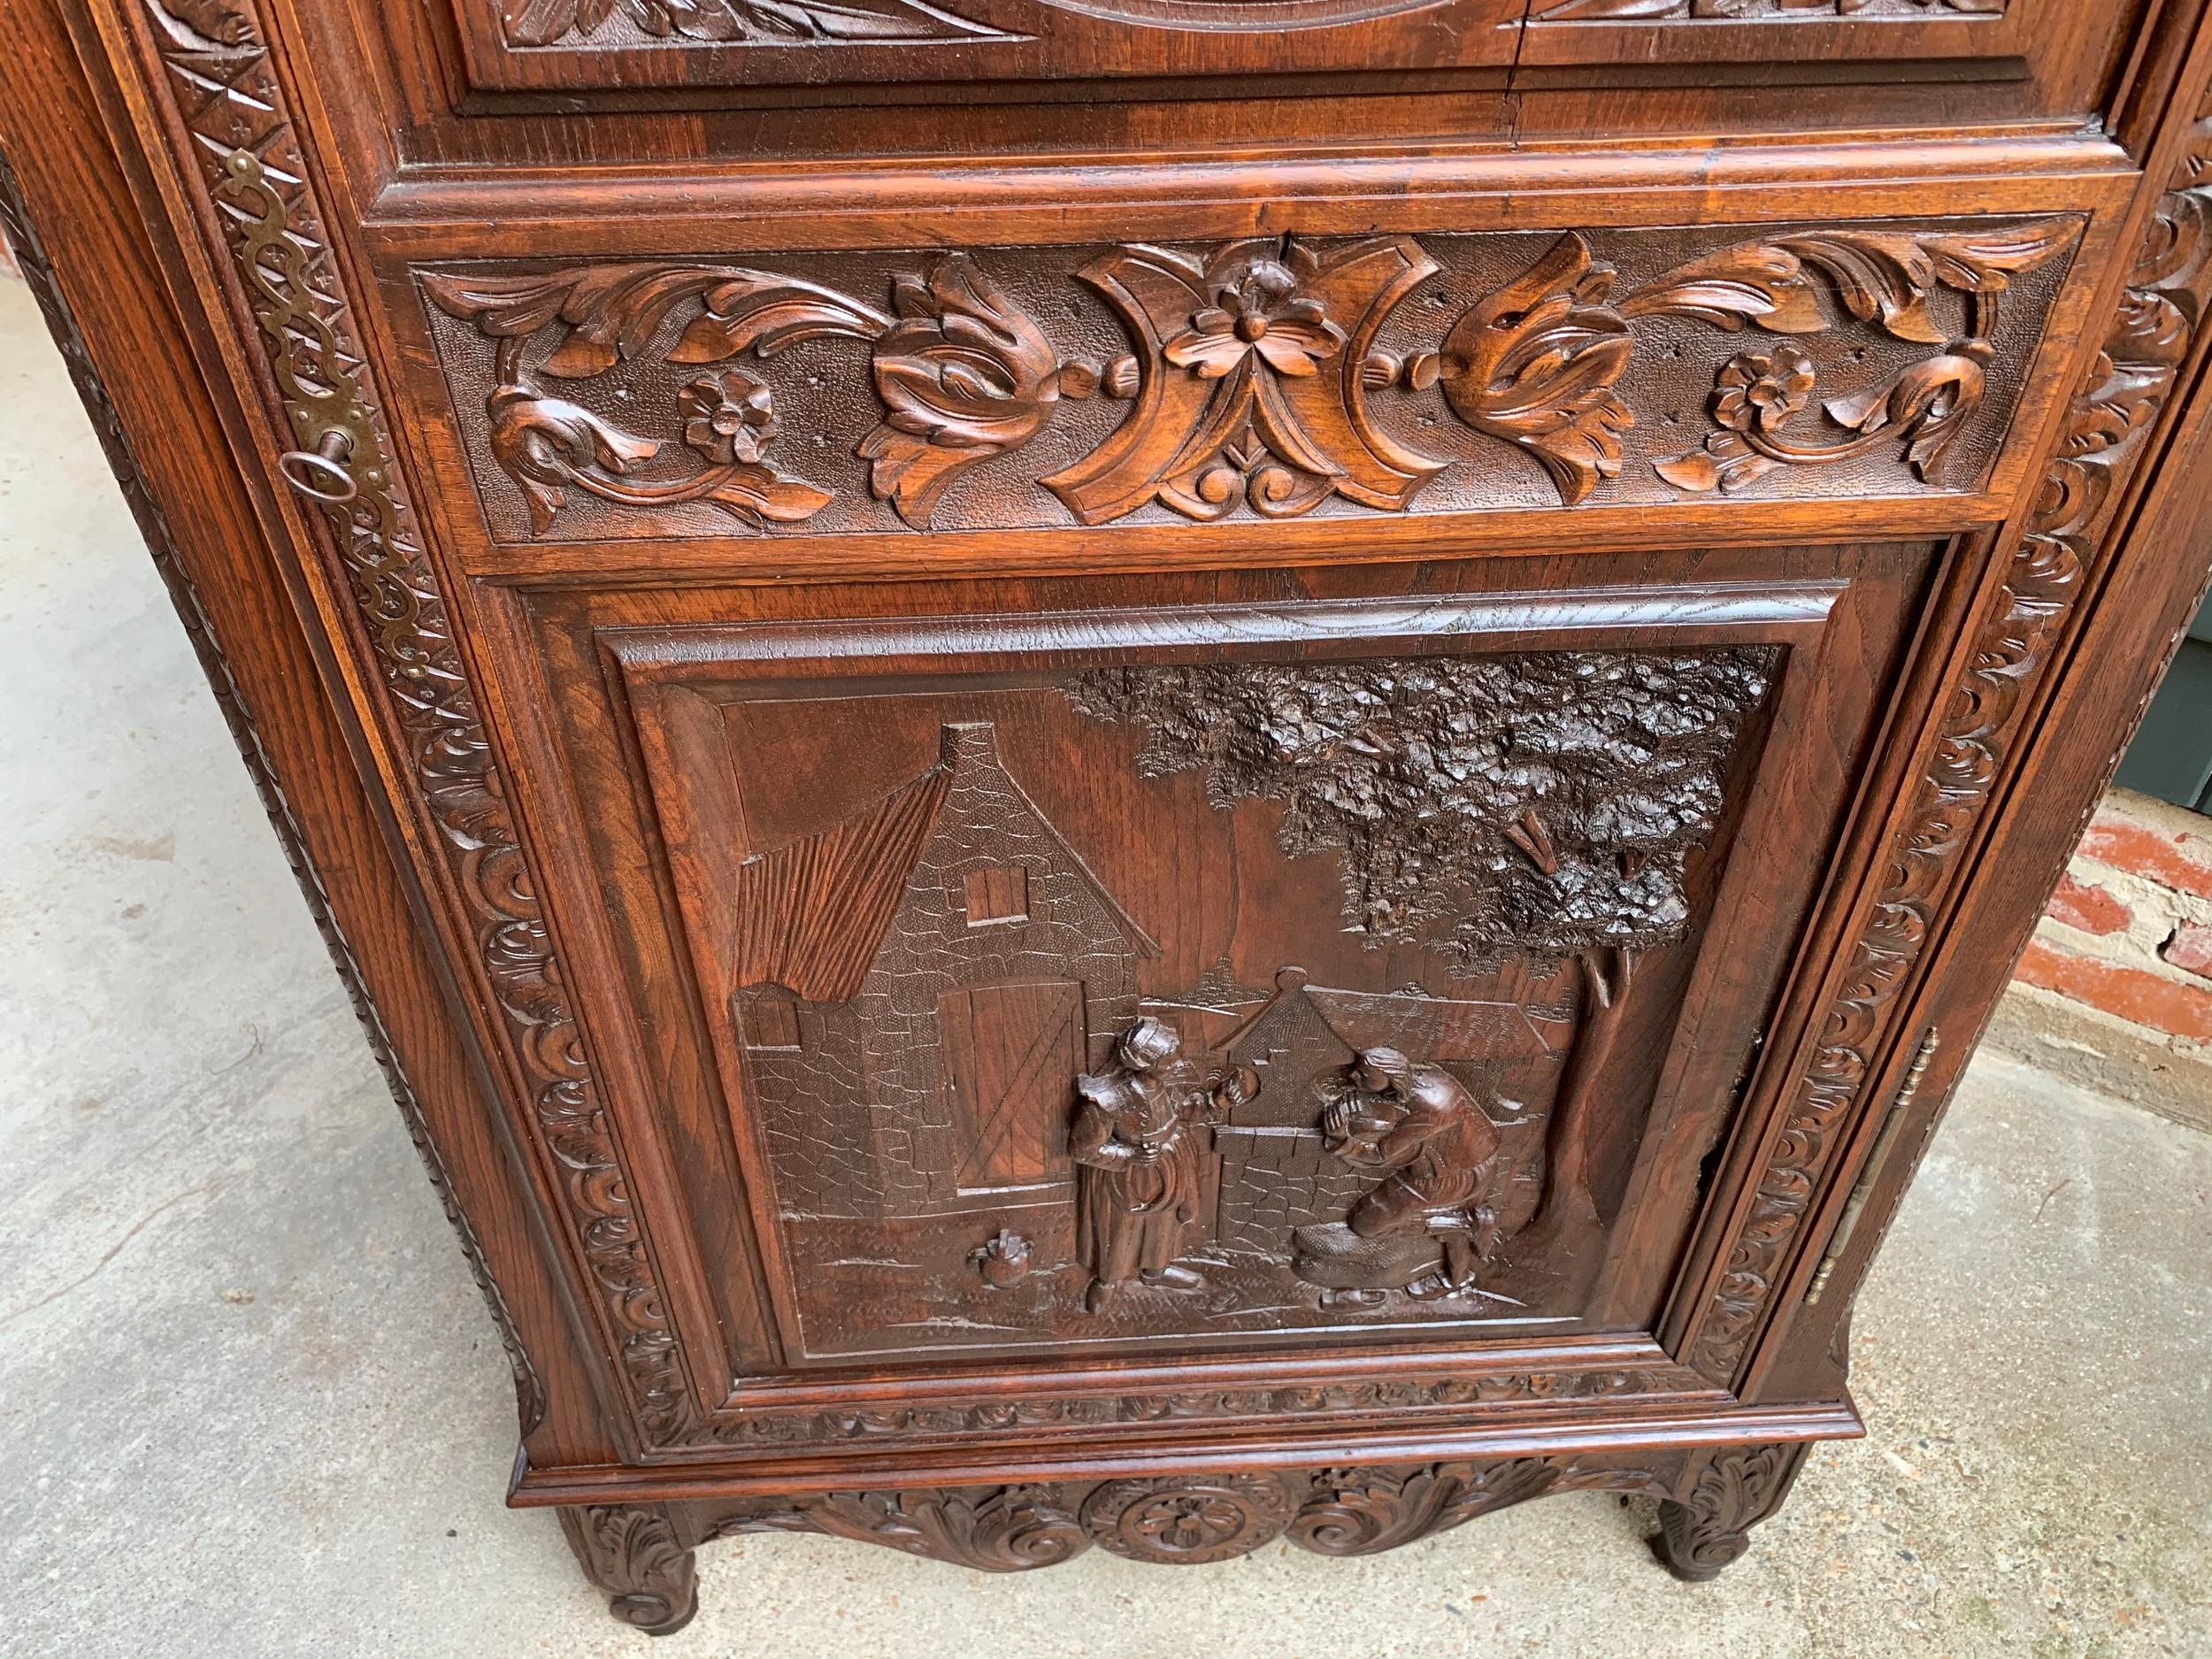 19th Century Antique Carved French Brittany Armoire Bonnetiere Cabinet Wardrobe Chestnut